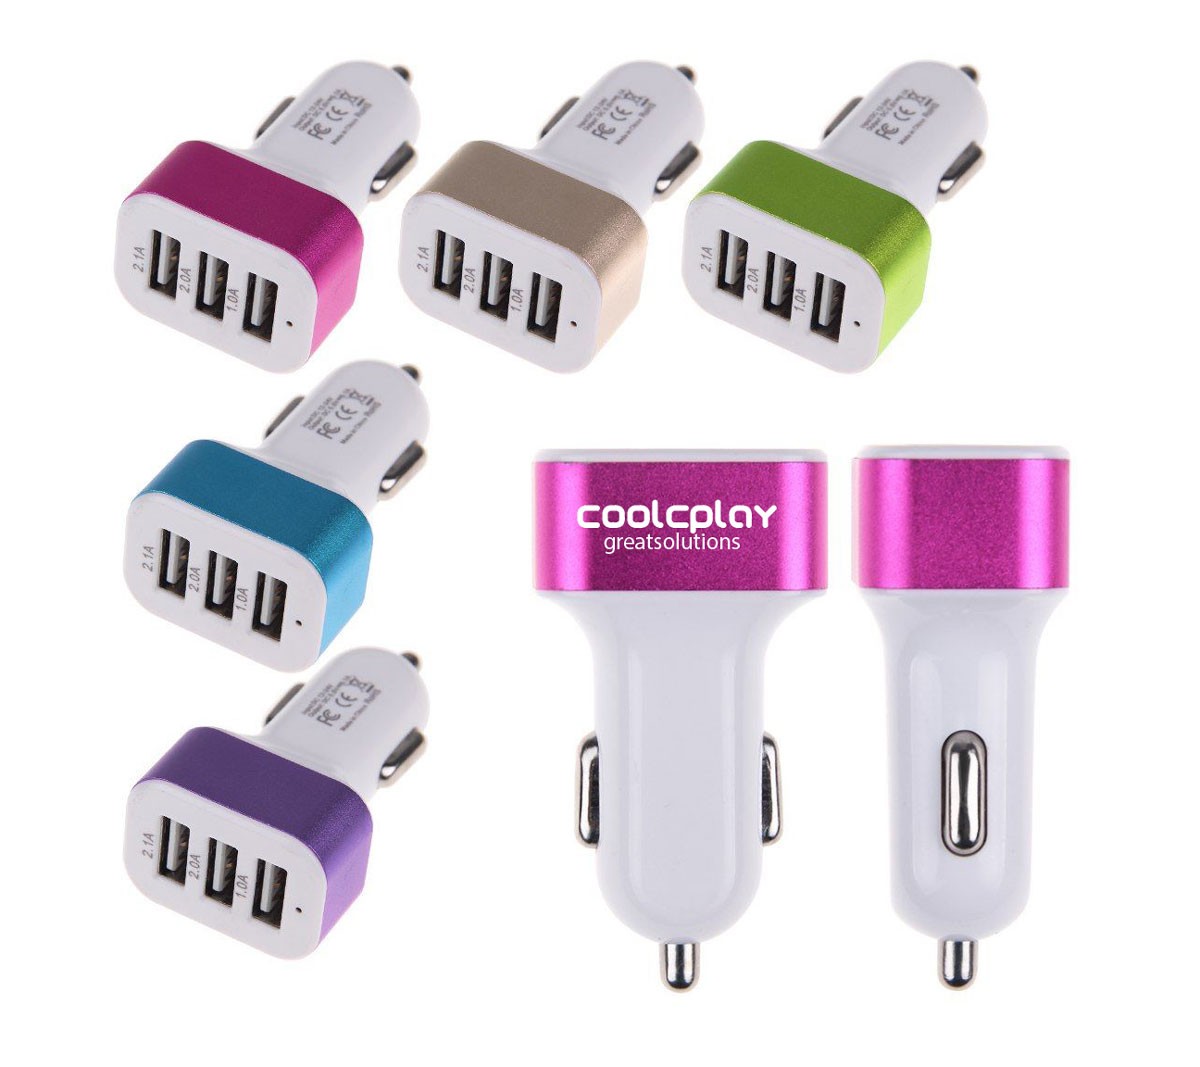 3 Port USB Car Charger Adapter